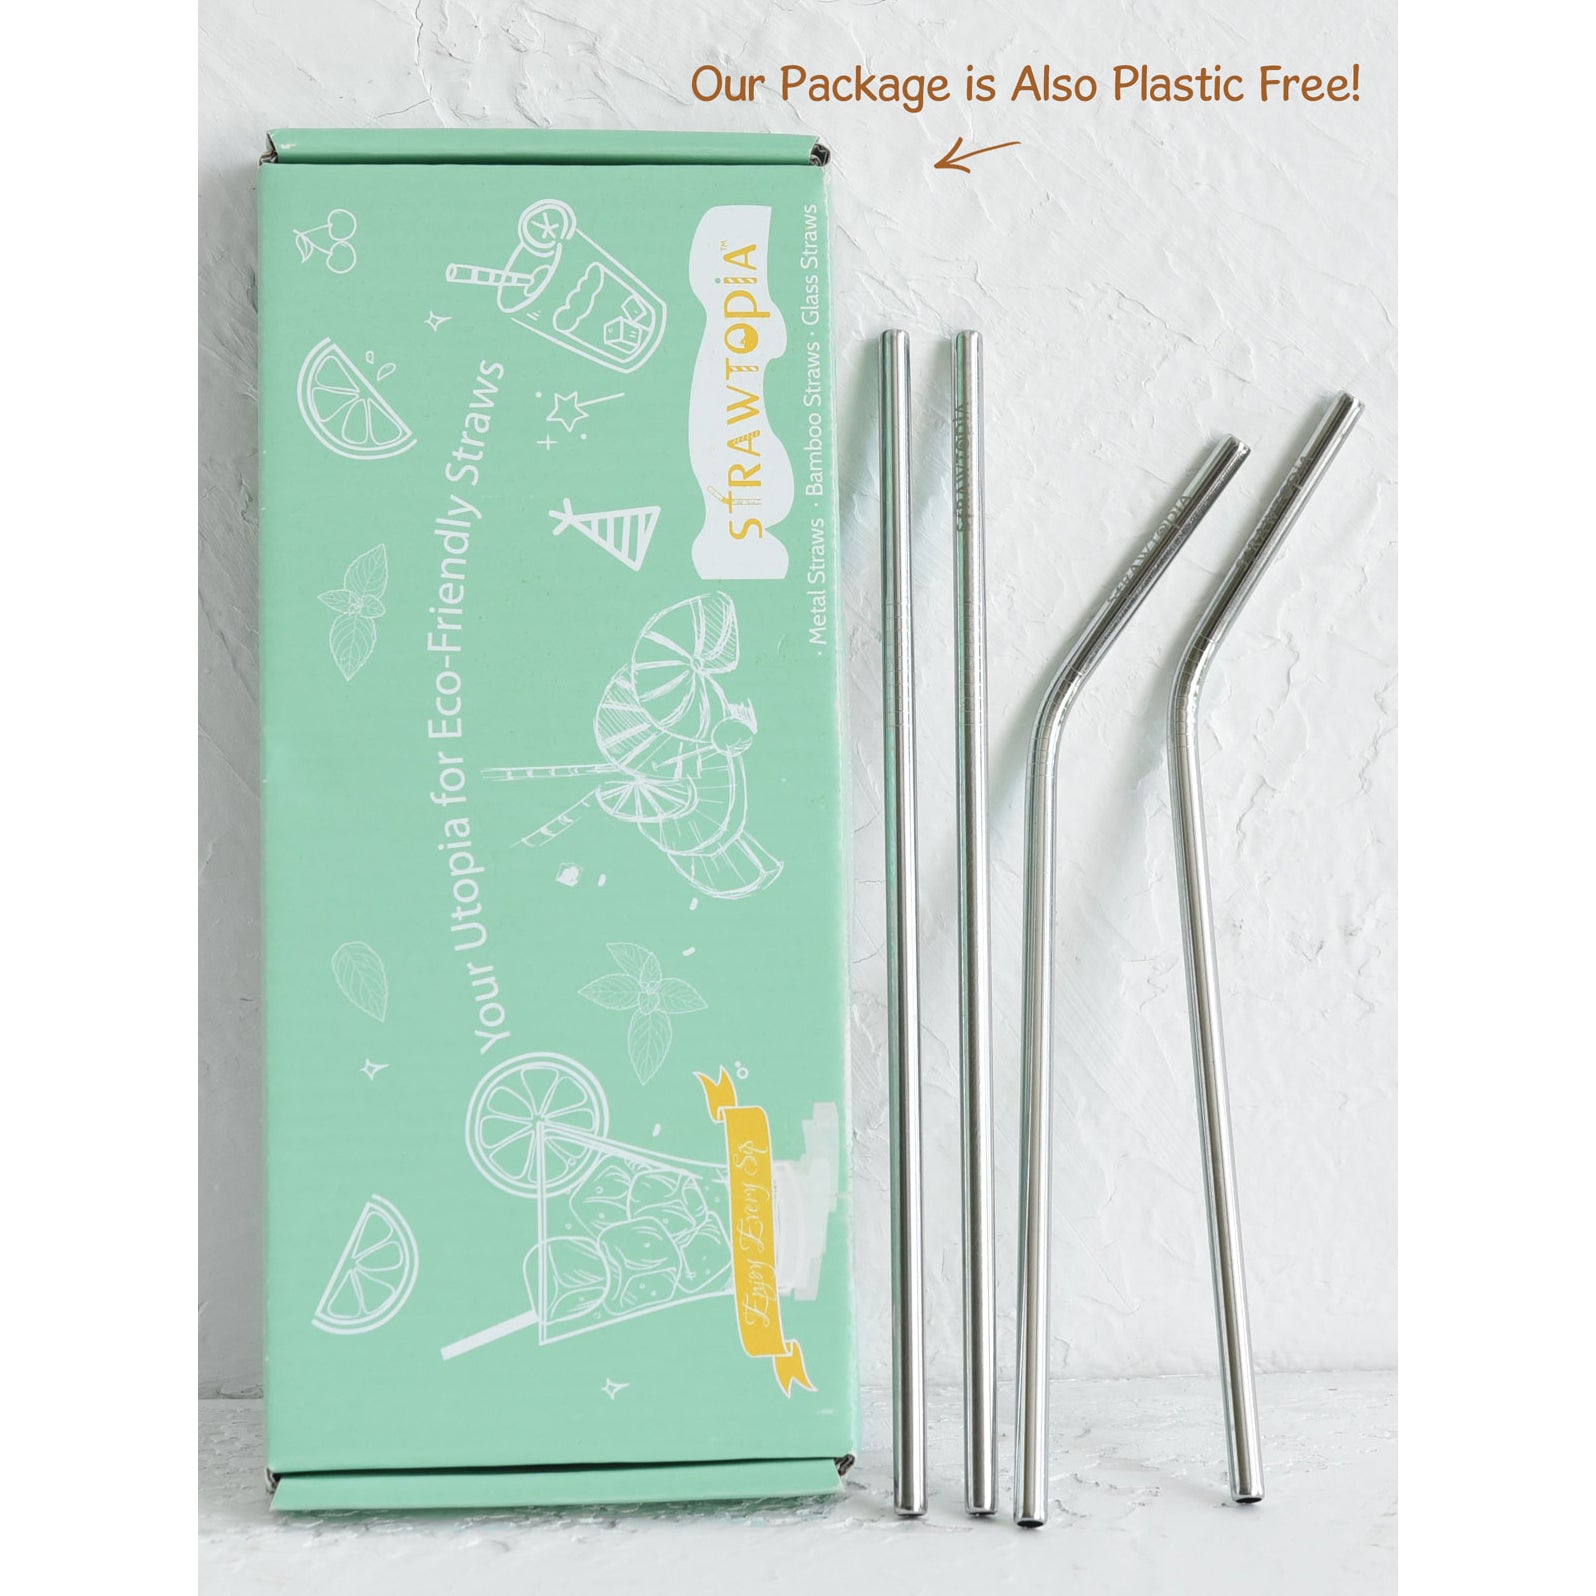 Metal Smoothie Straws, 10 Inch Aluminum Straws Colored Wide Reusable  Drinking Straws, 8 PCS Extra Long Bent Straws with 2 Cleaning Brushes for  30